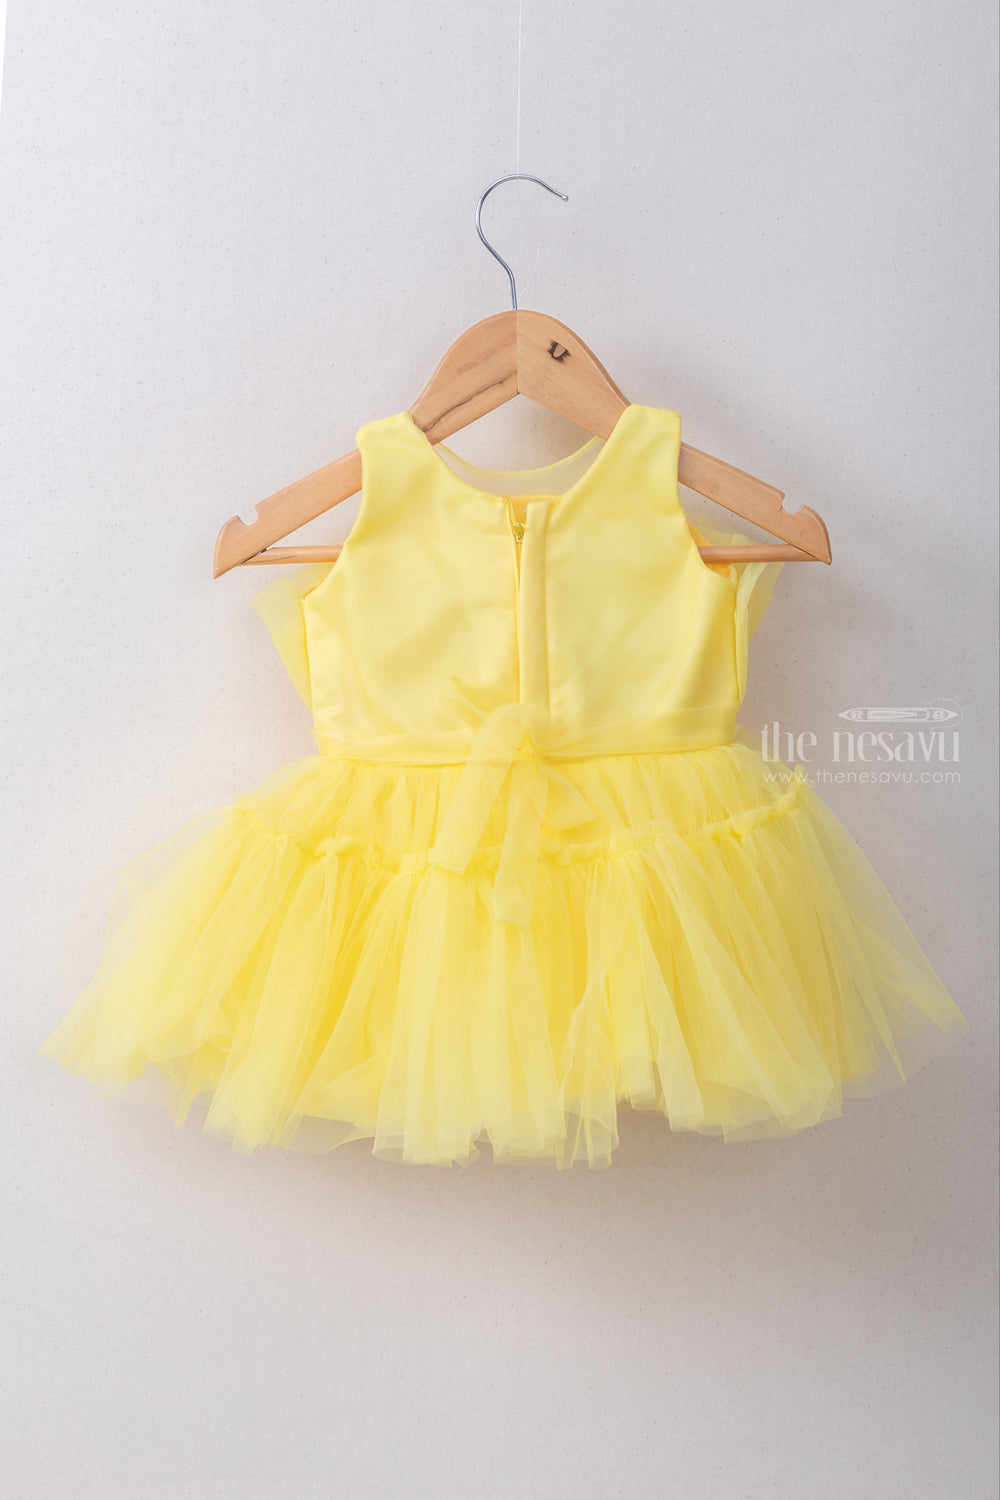 The Nesavu Party Frock Bright Yellow Soft Net Fluffy A-Line Frock With Matching Hairband And Shoes psr silks Nesavu